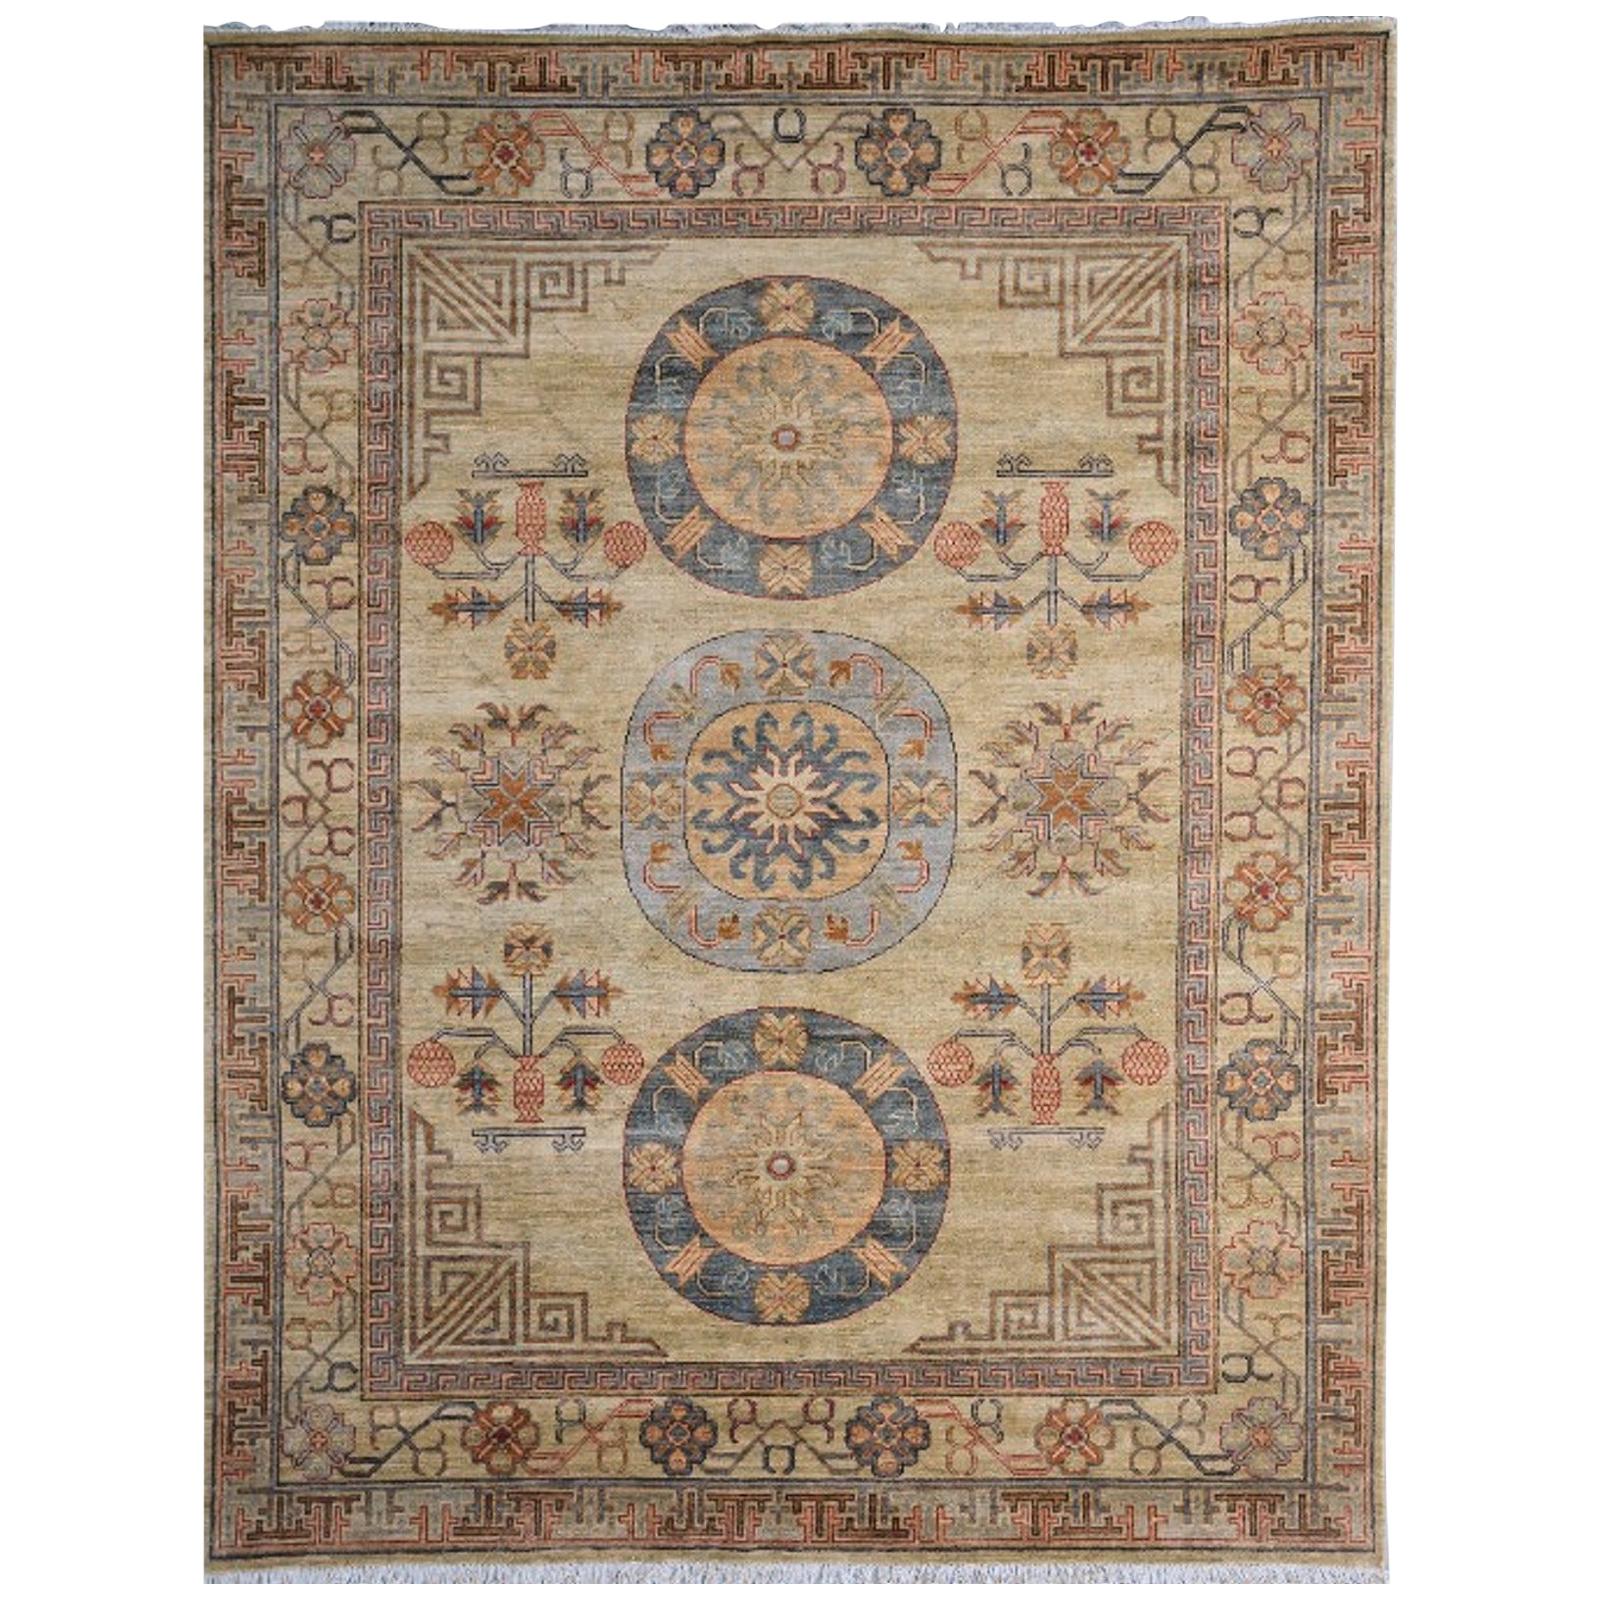 7 x 9 ft Samarkand Khotan Rug Hand Knotted Contemporary beige brown blue